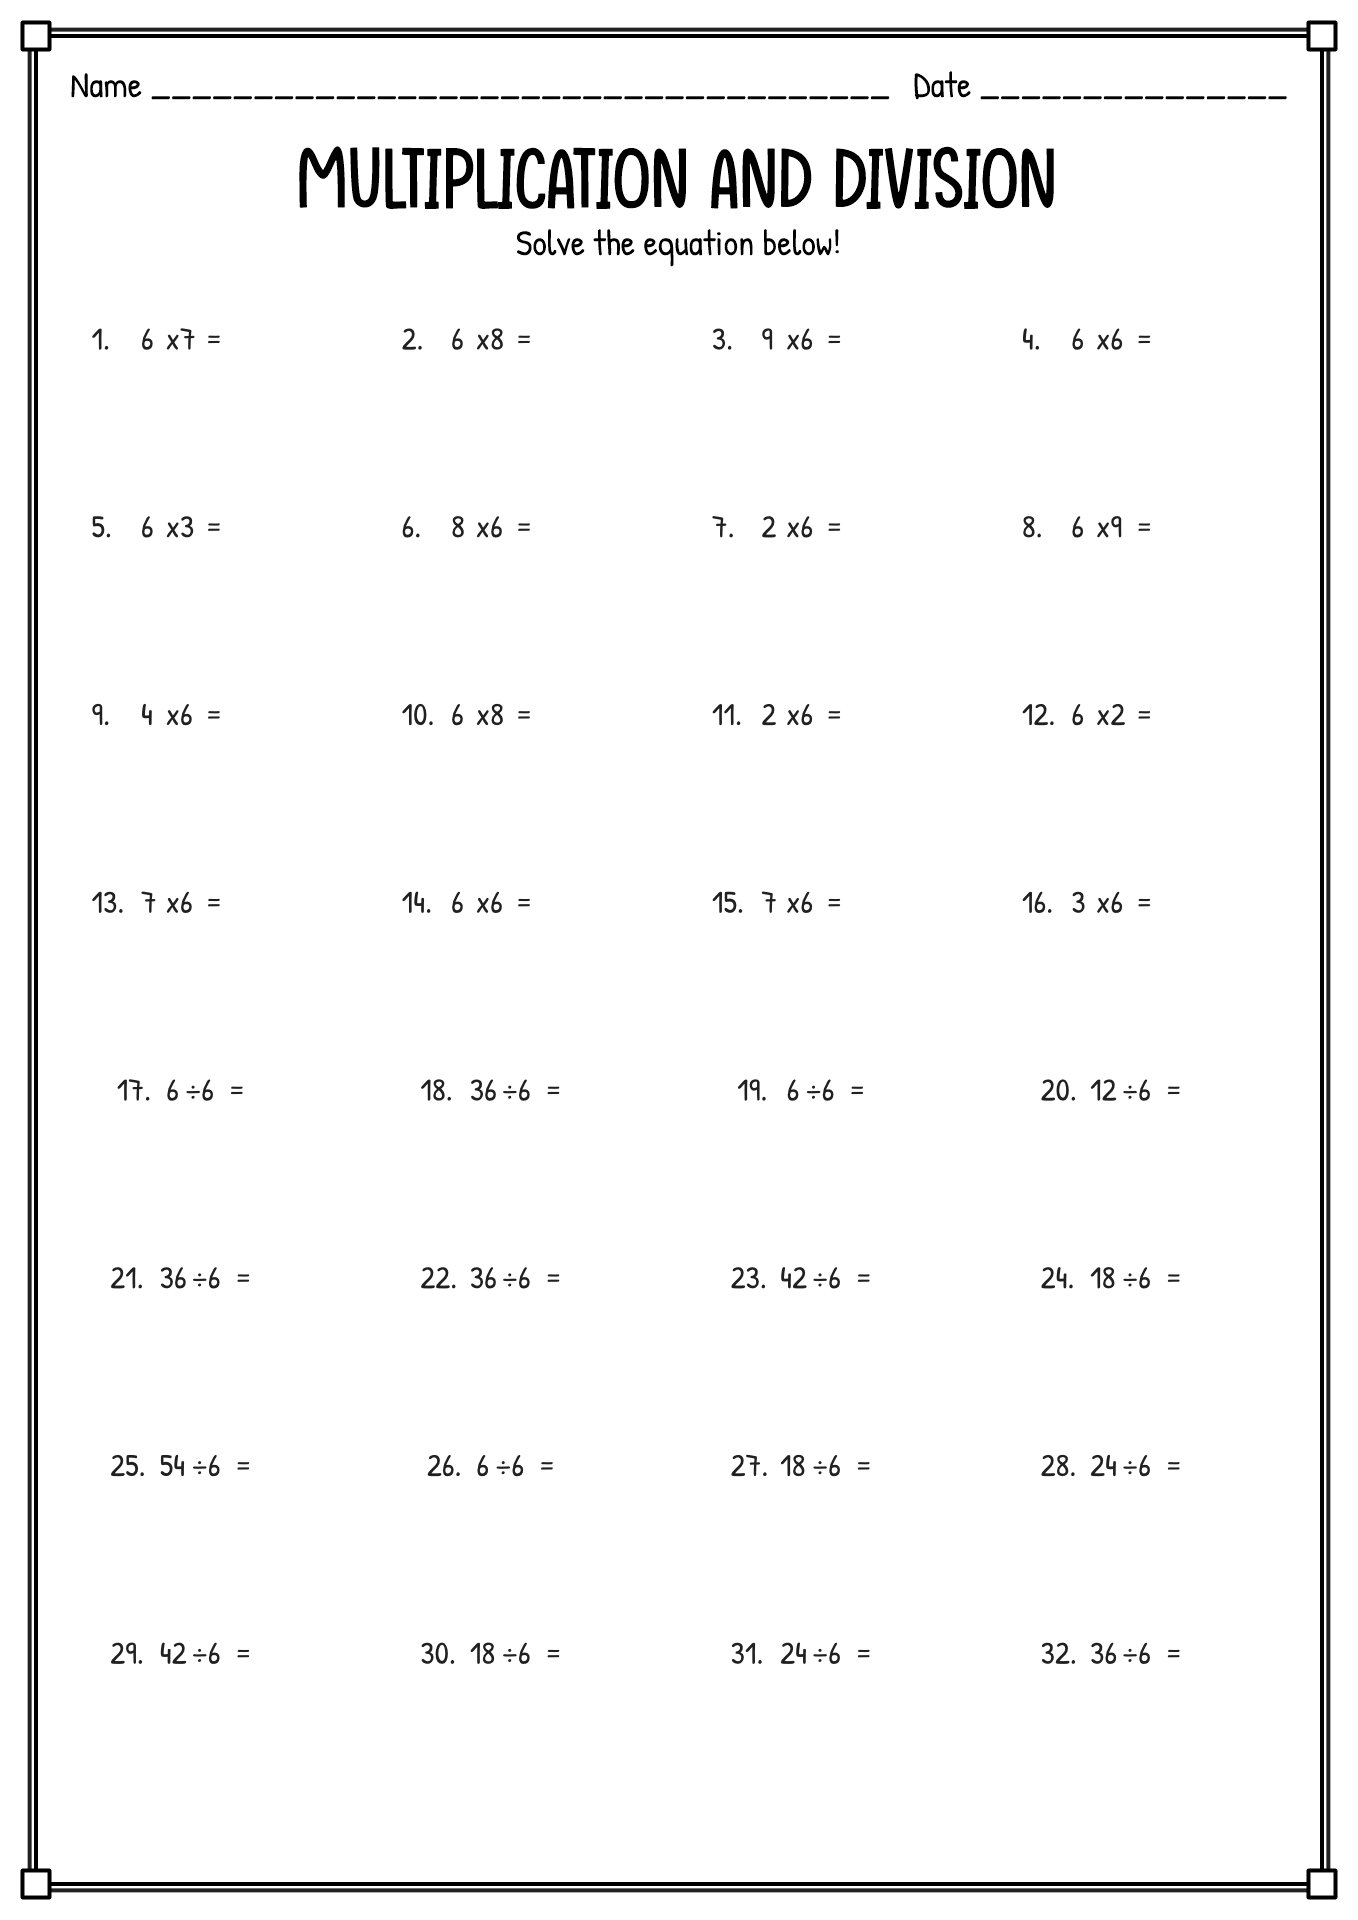 16-best-images-of-multiplication-and-division-word-problems-worksheets-3rd-grade-math-word